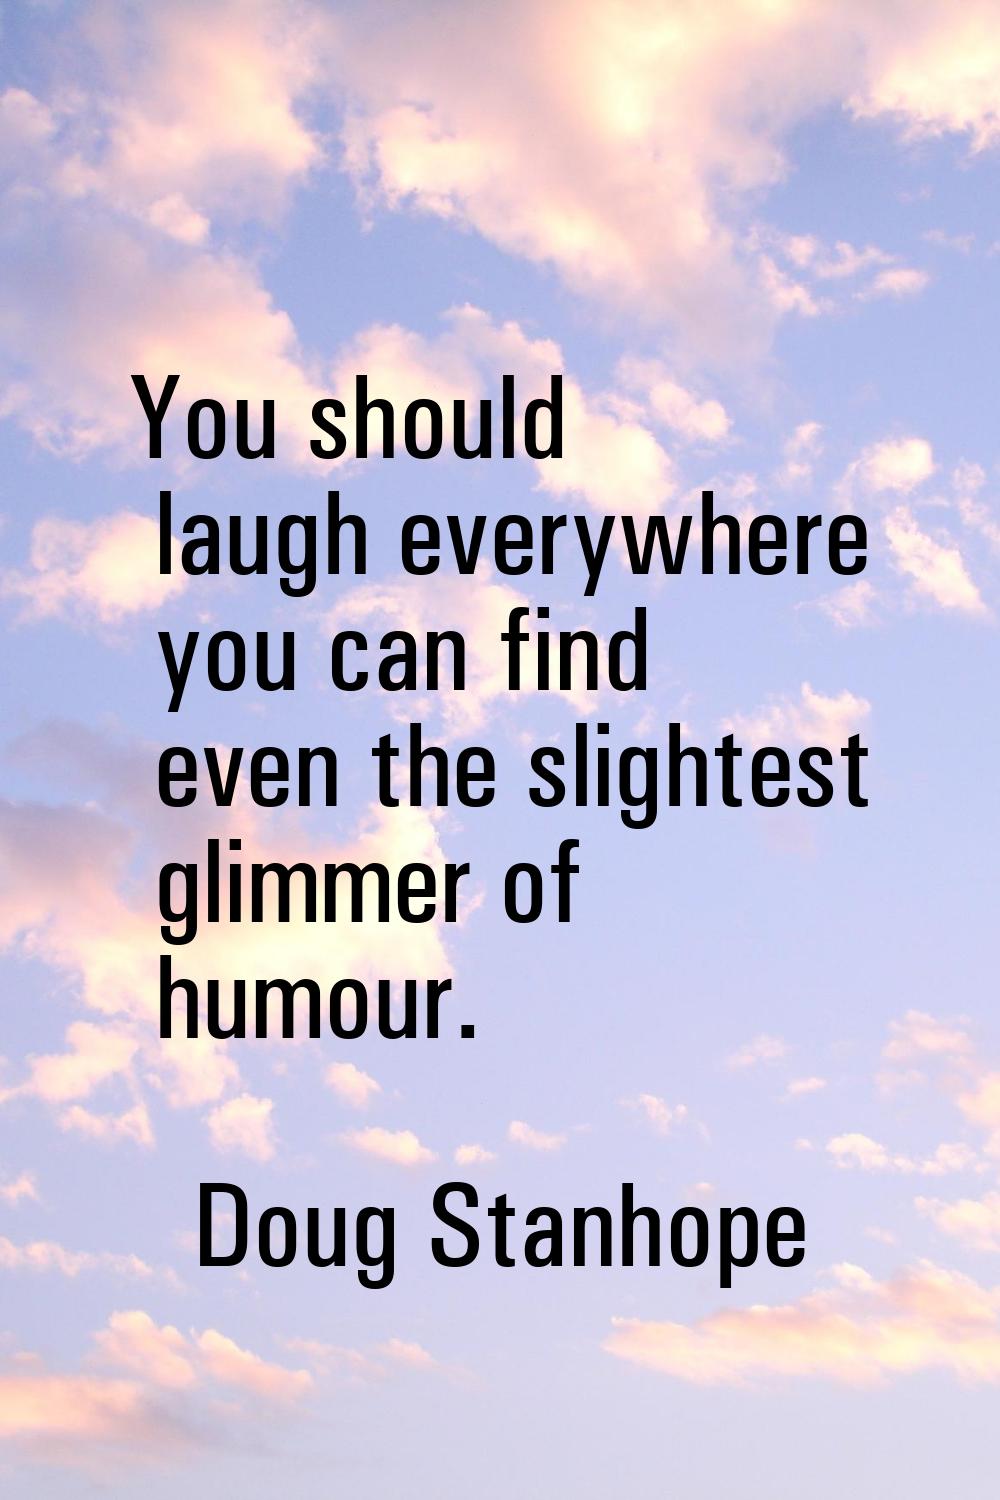 You should laugh everywhere you can find even the slightest glimmer of humour.